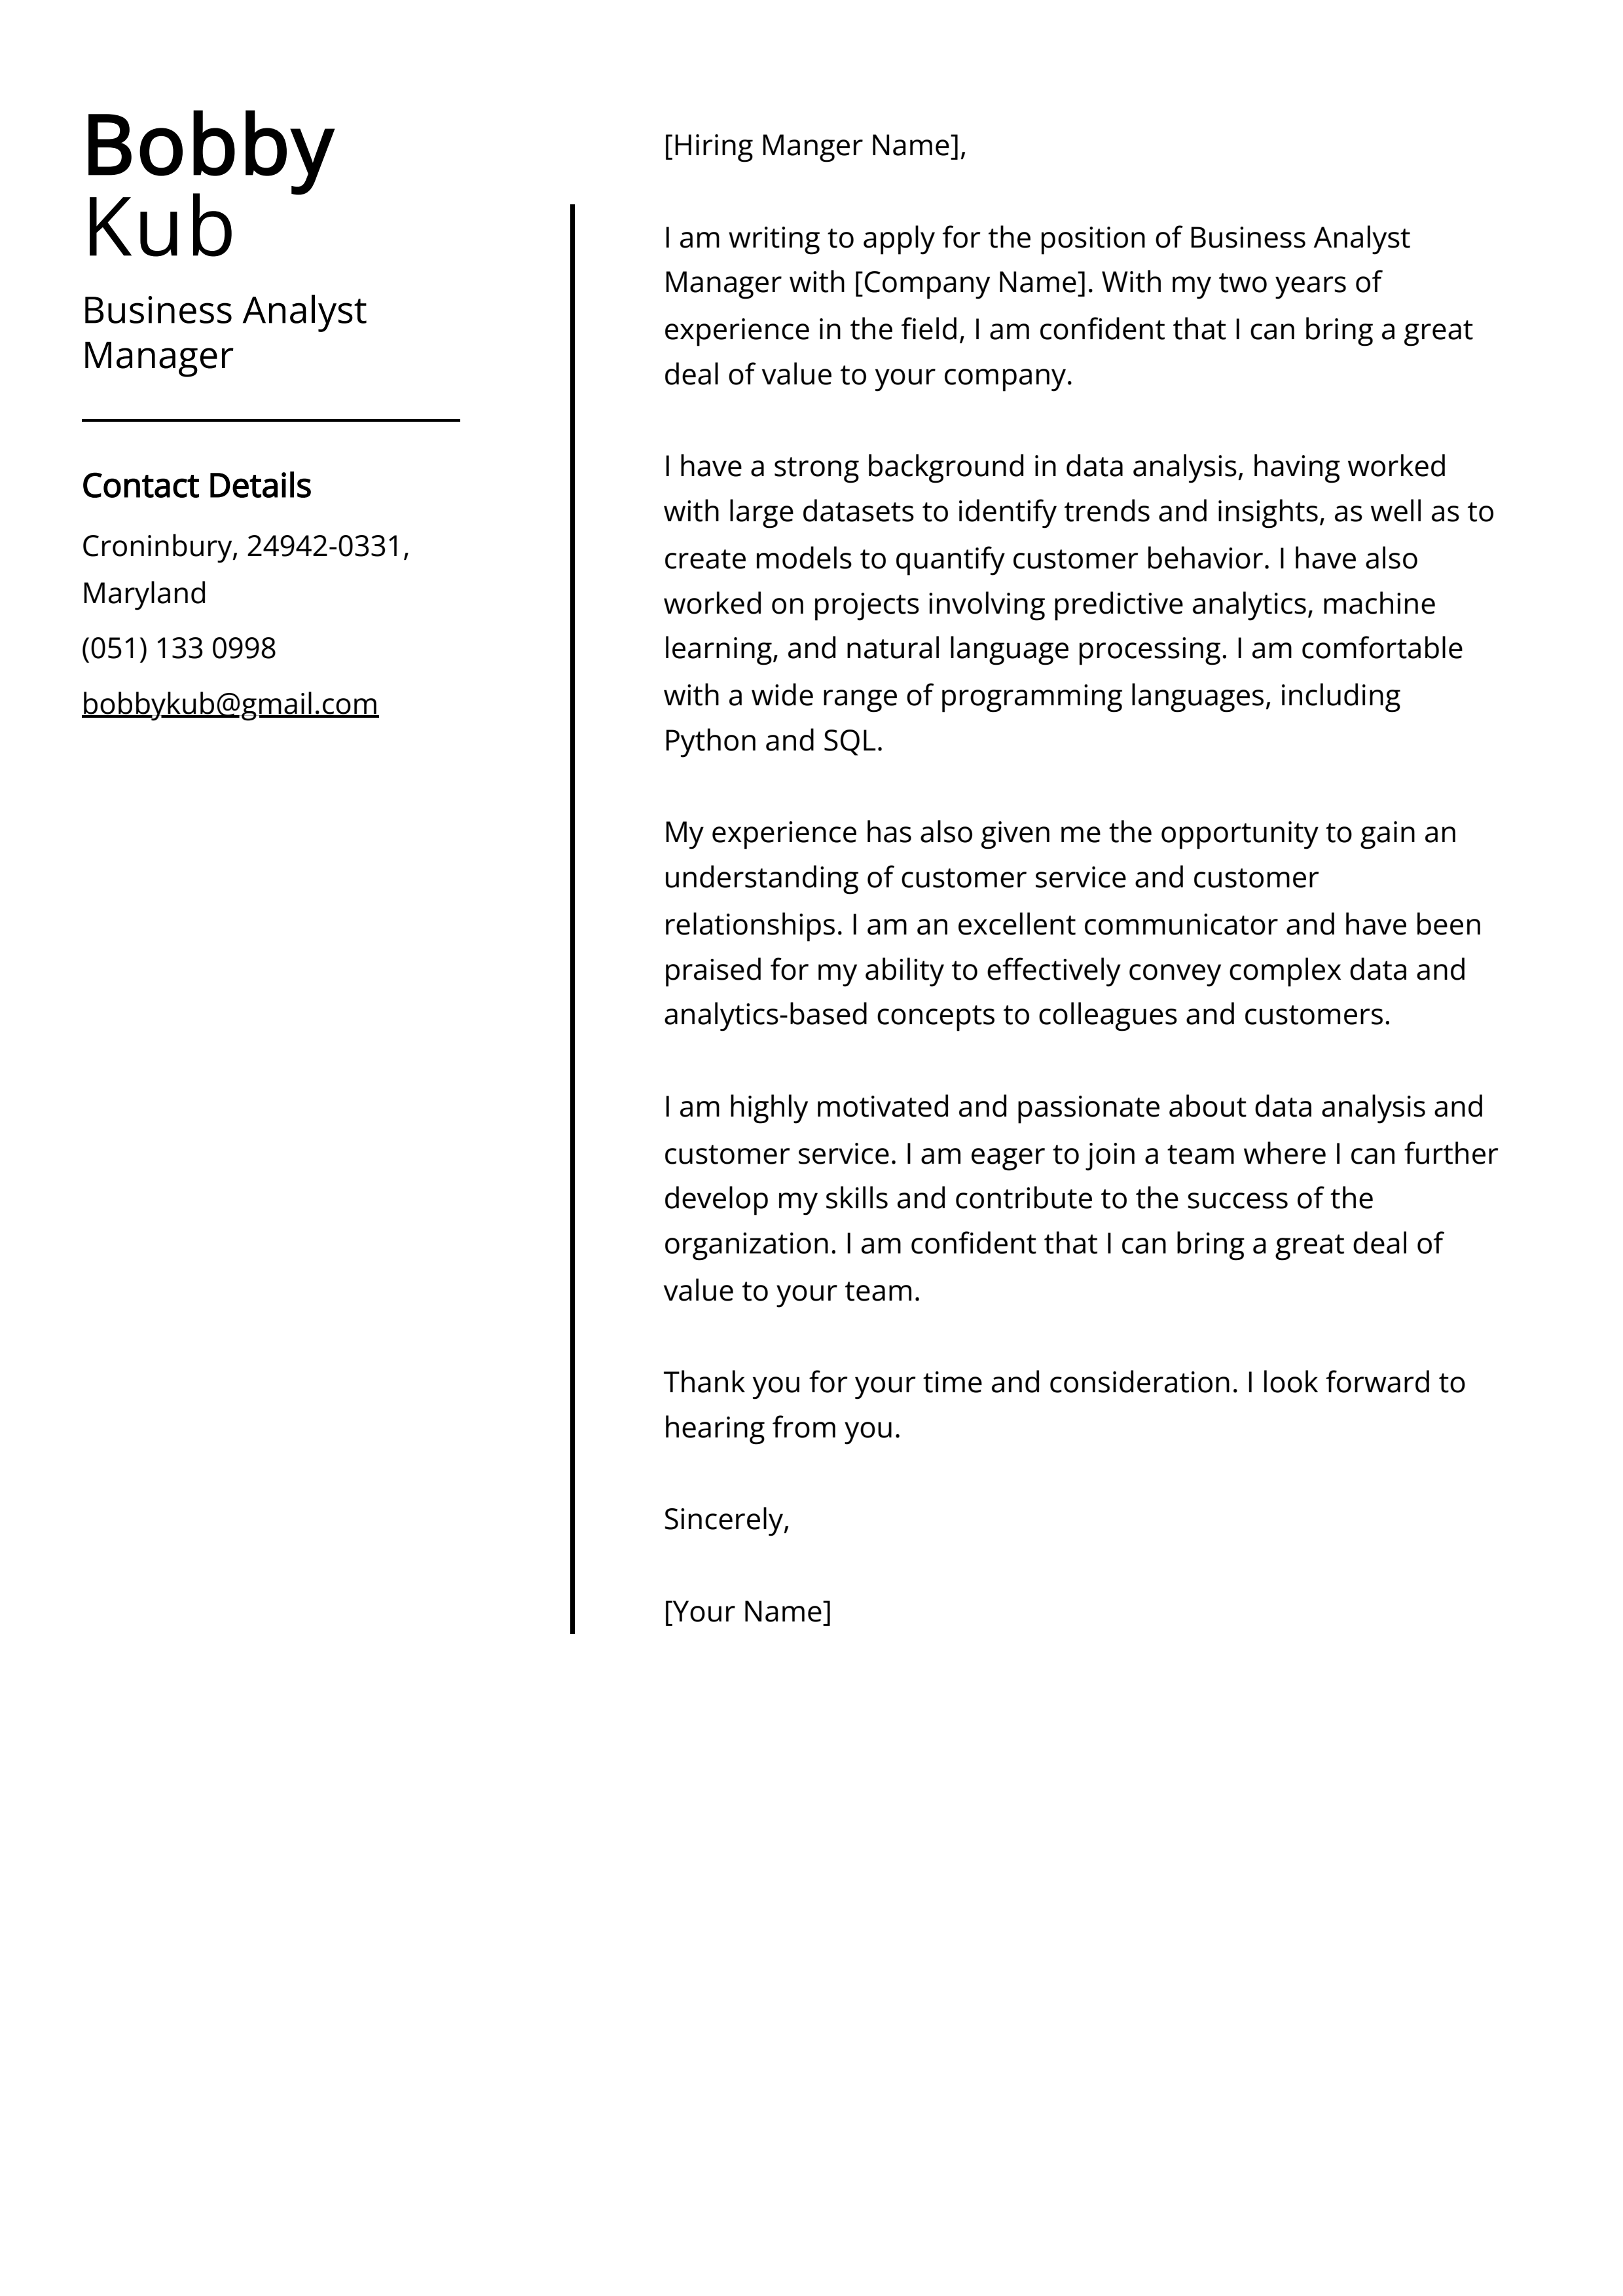 Business Analyst Manager Cover Letter Example